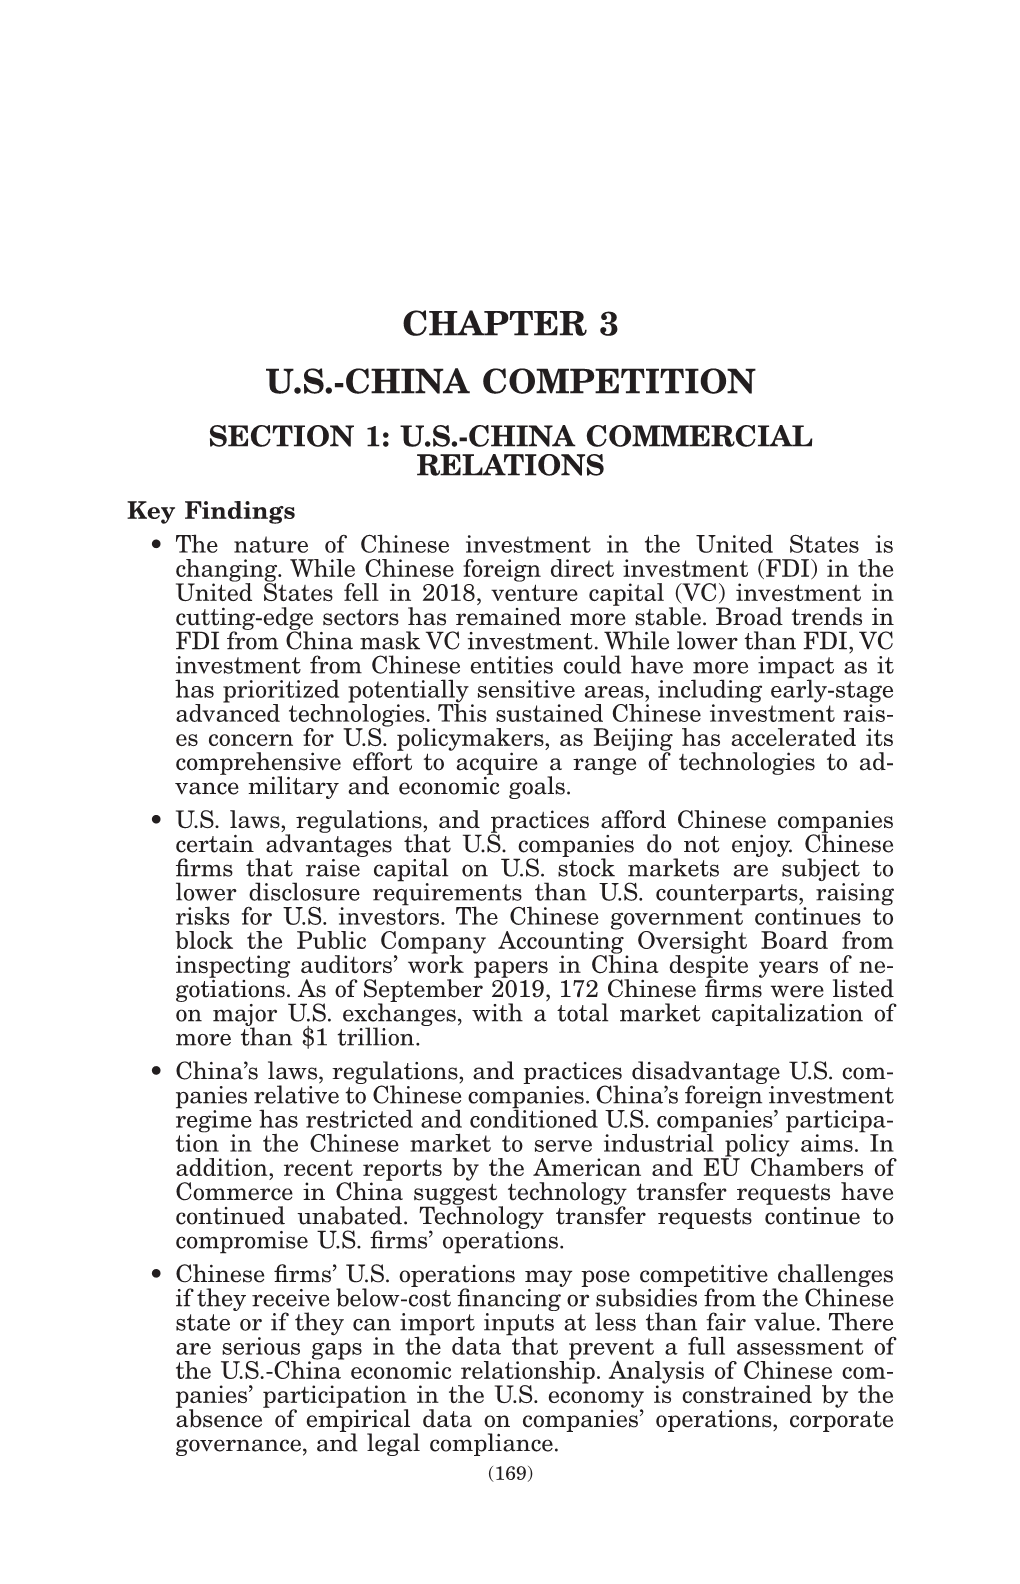 CHAPTER 3 U.S.-CHINA COMPETITION SECTION 1: U.S.-CHINA COMMERCIAL RELATIONS Key Findings •• the Nature of Chinese Investment in the United States Is Changing